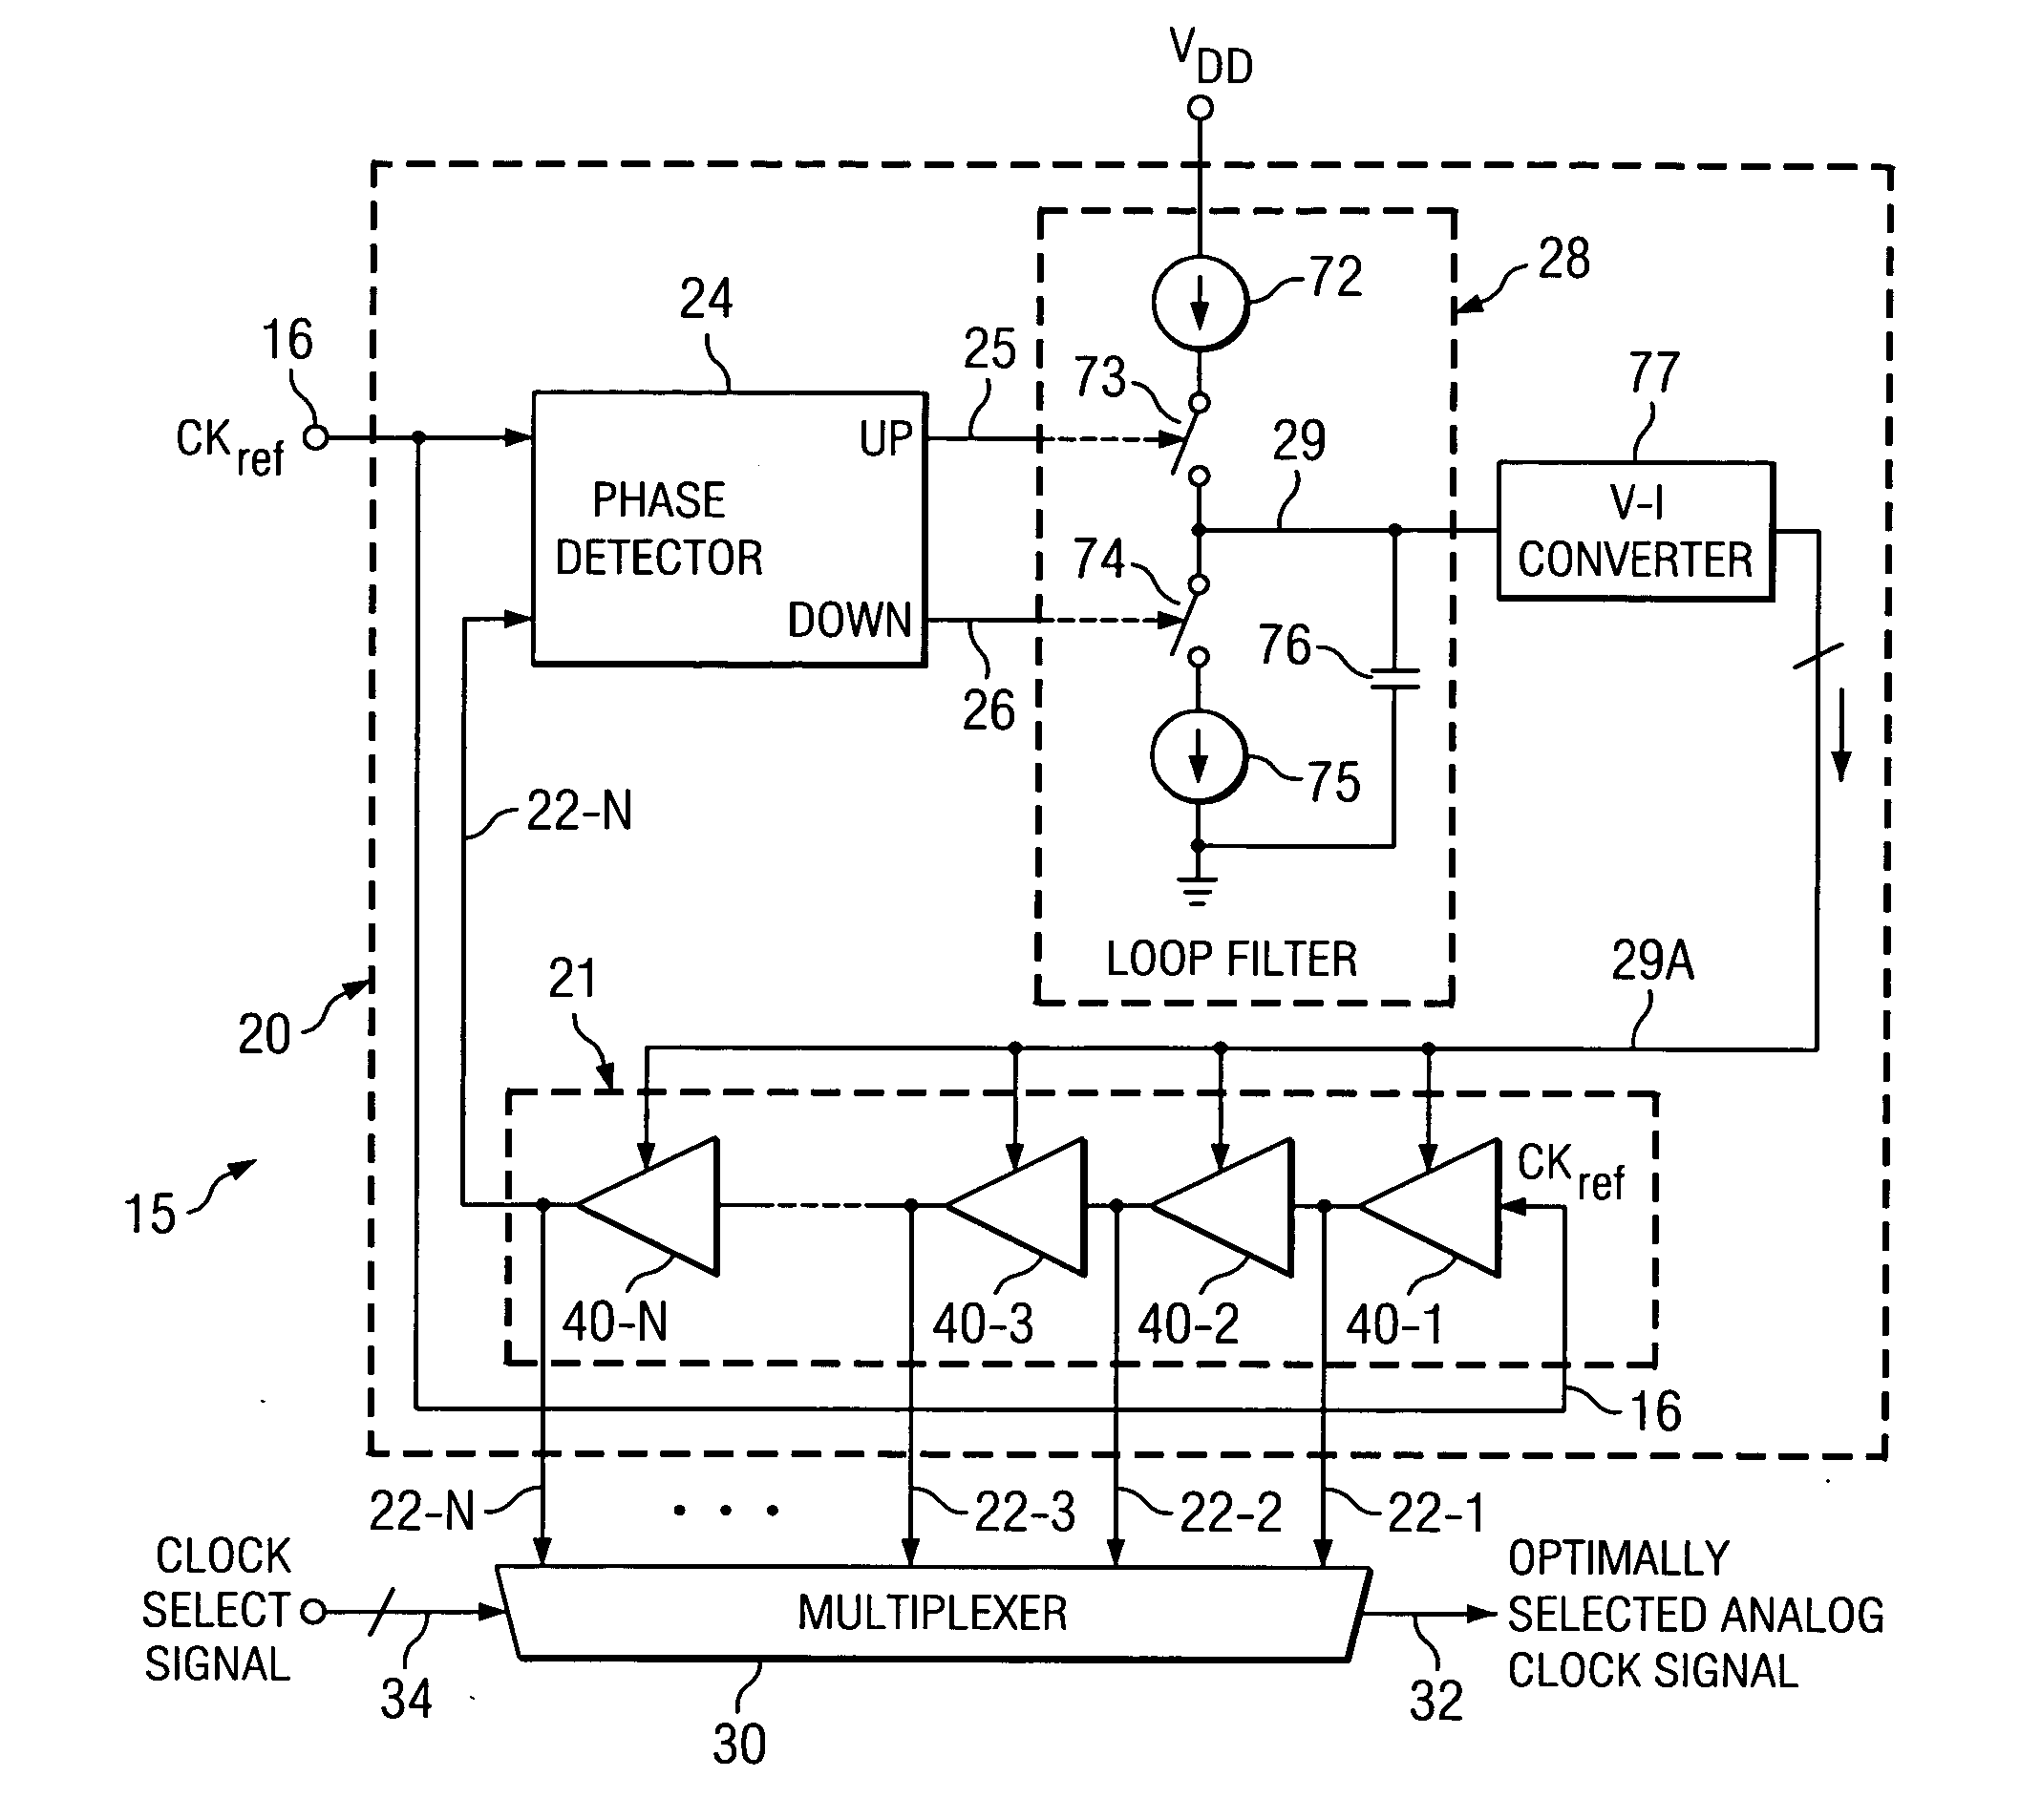 Delay locked loop circuitry and method for optimizing delay timing in mixed signal systems